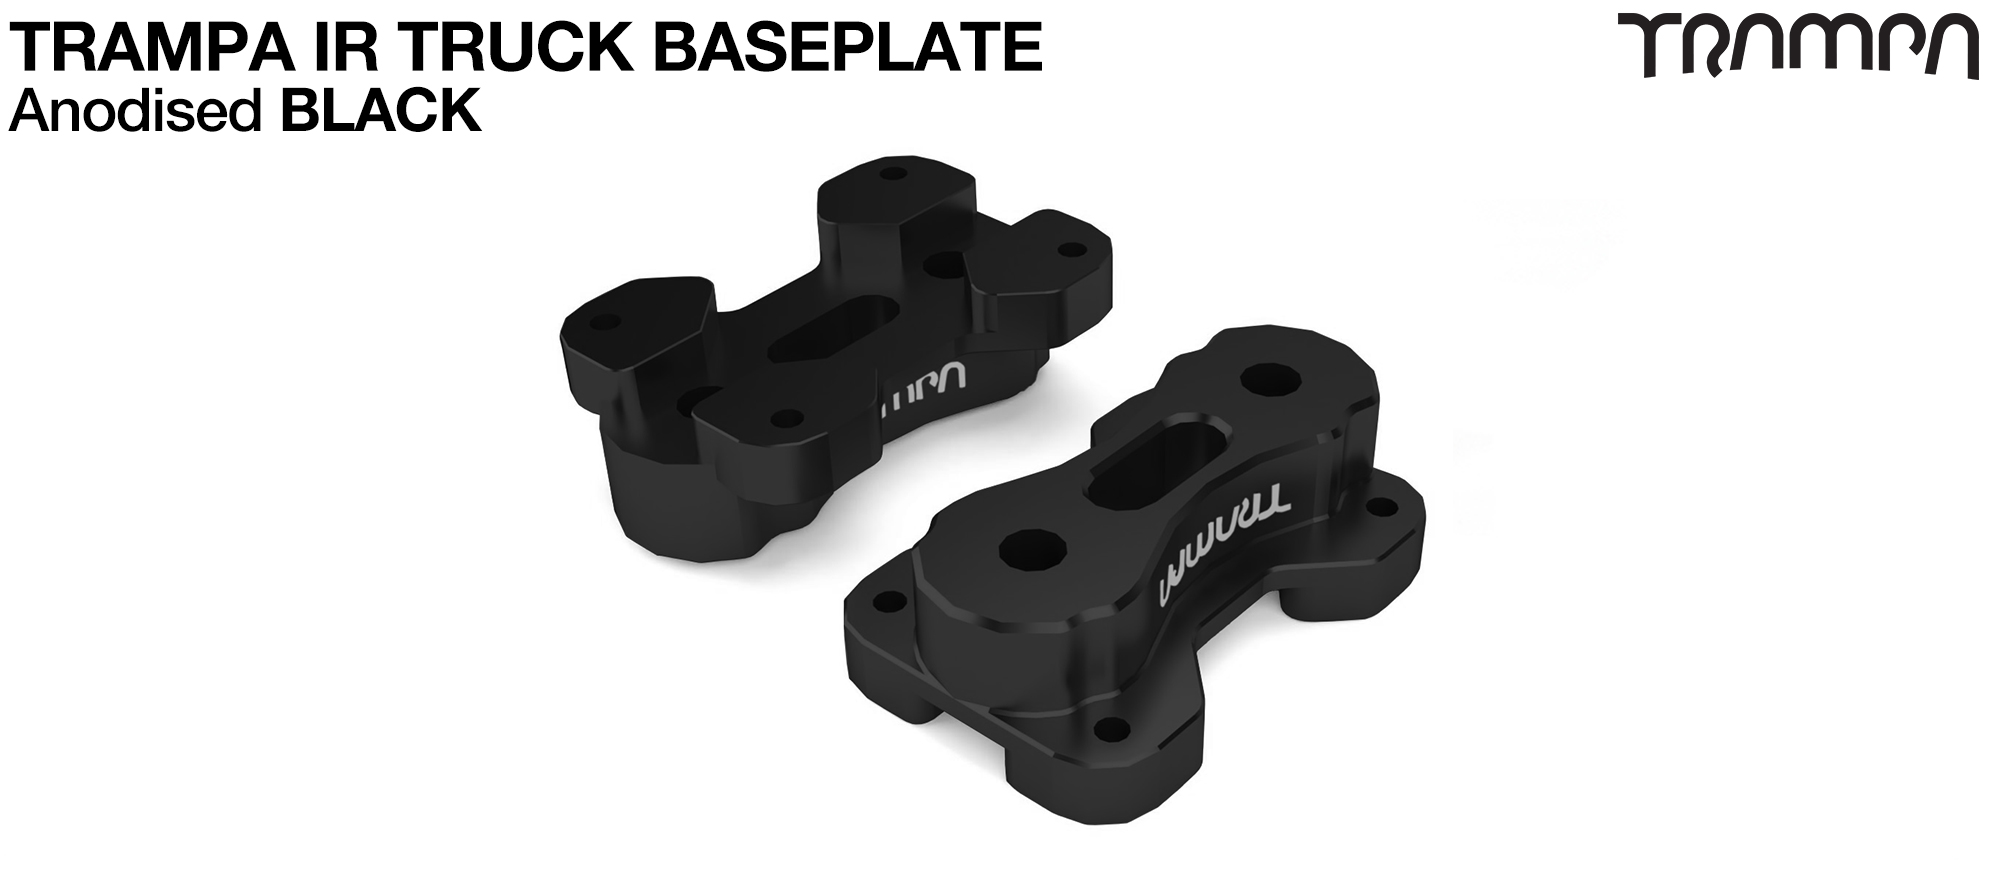 TRAMPA IR BASEPLATE - CNC Precision made TRAMPA IR Trucks are super light & Packed with performance - BLACK